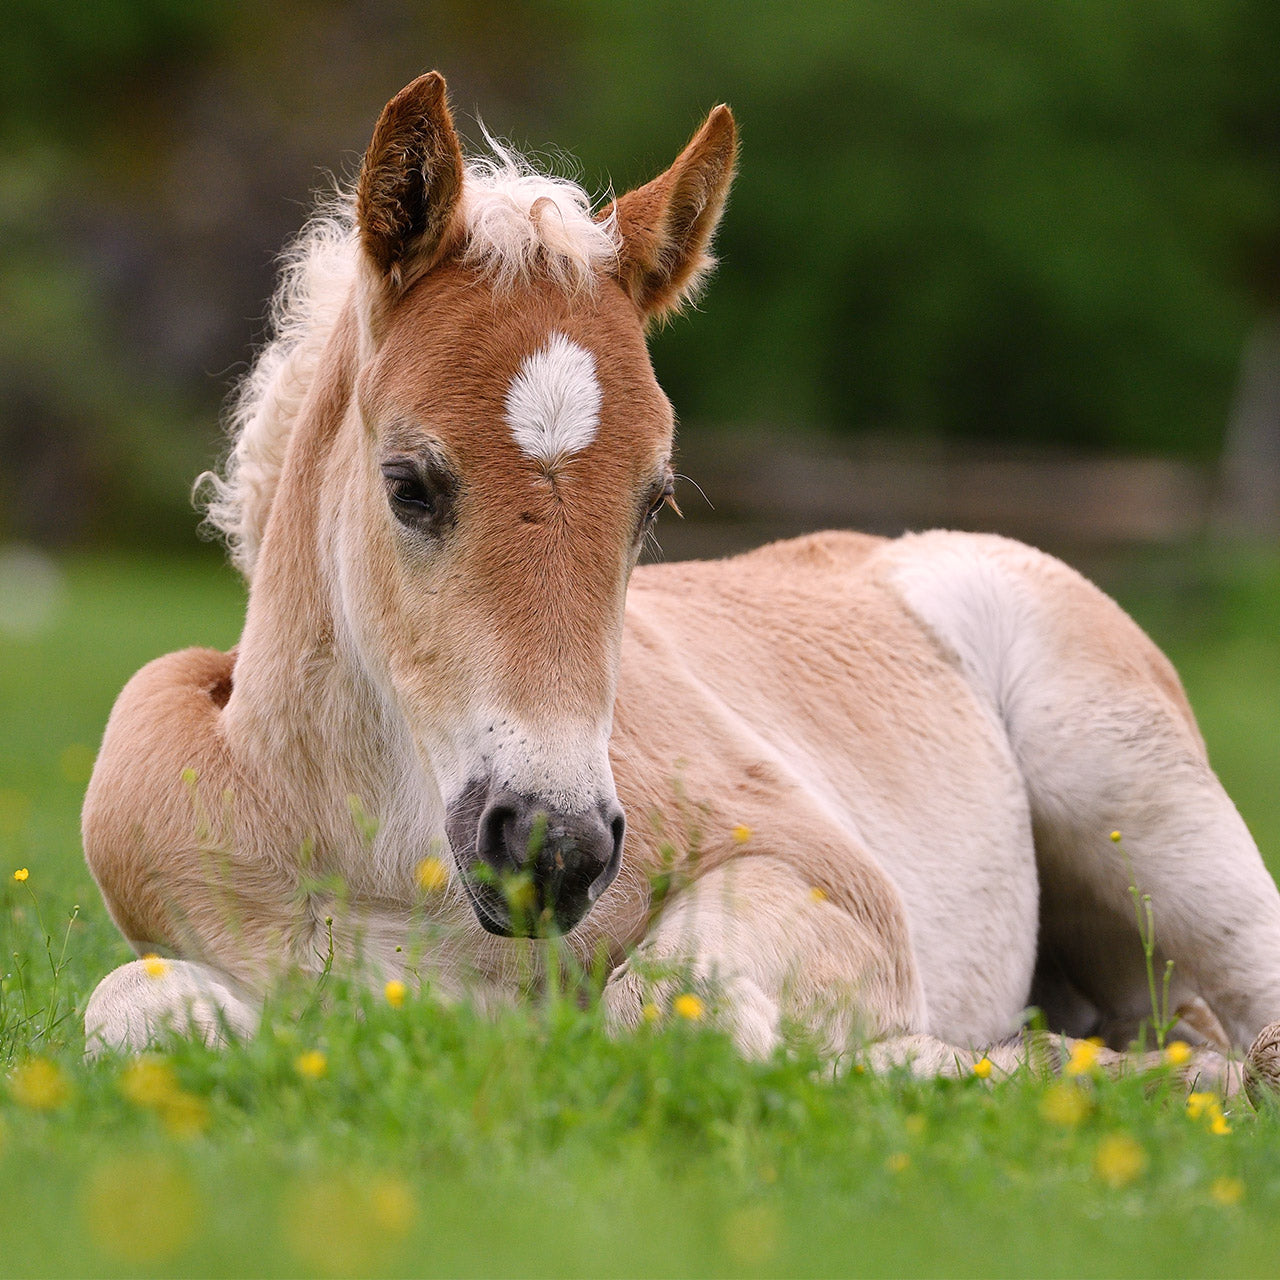 Housing and pasture needs for young horses